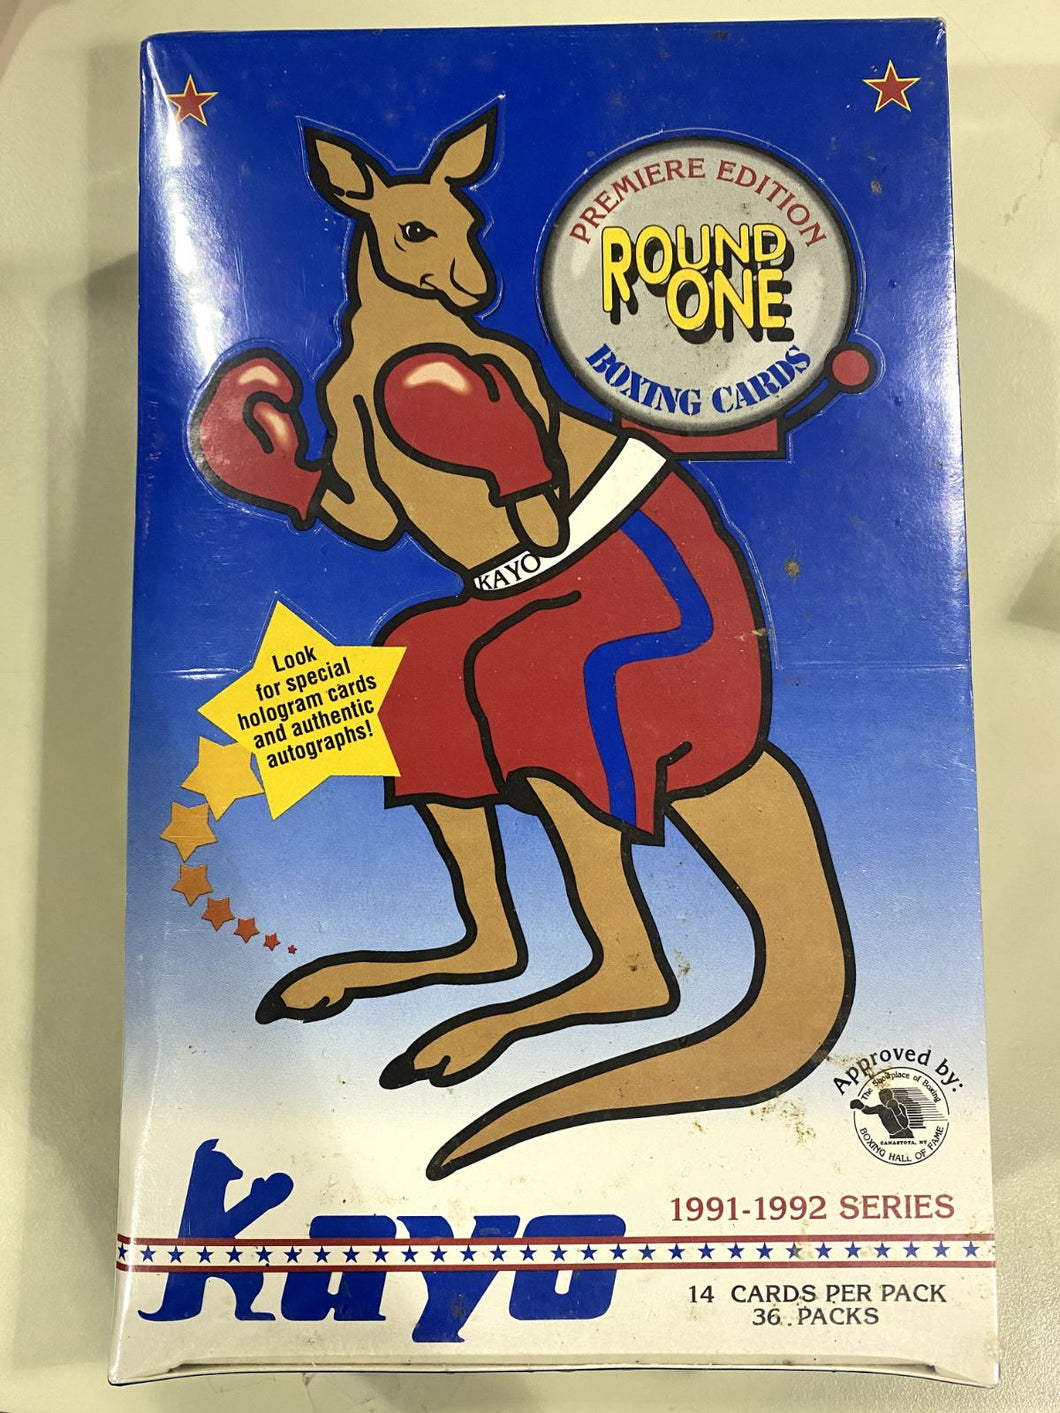 1991-1992 Series Kayo Boxing Sealed Premier Addition of 36 Packs 14 Cards